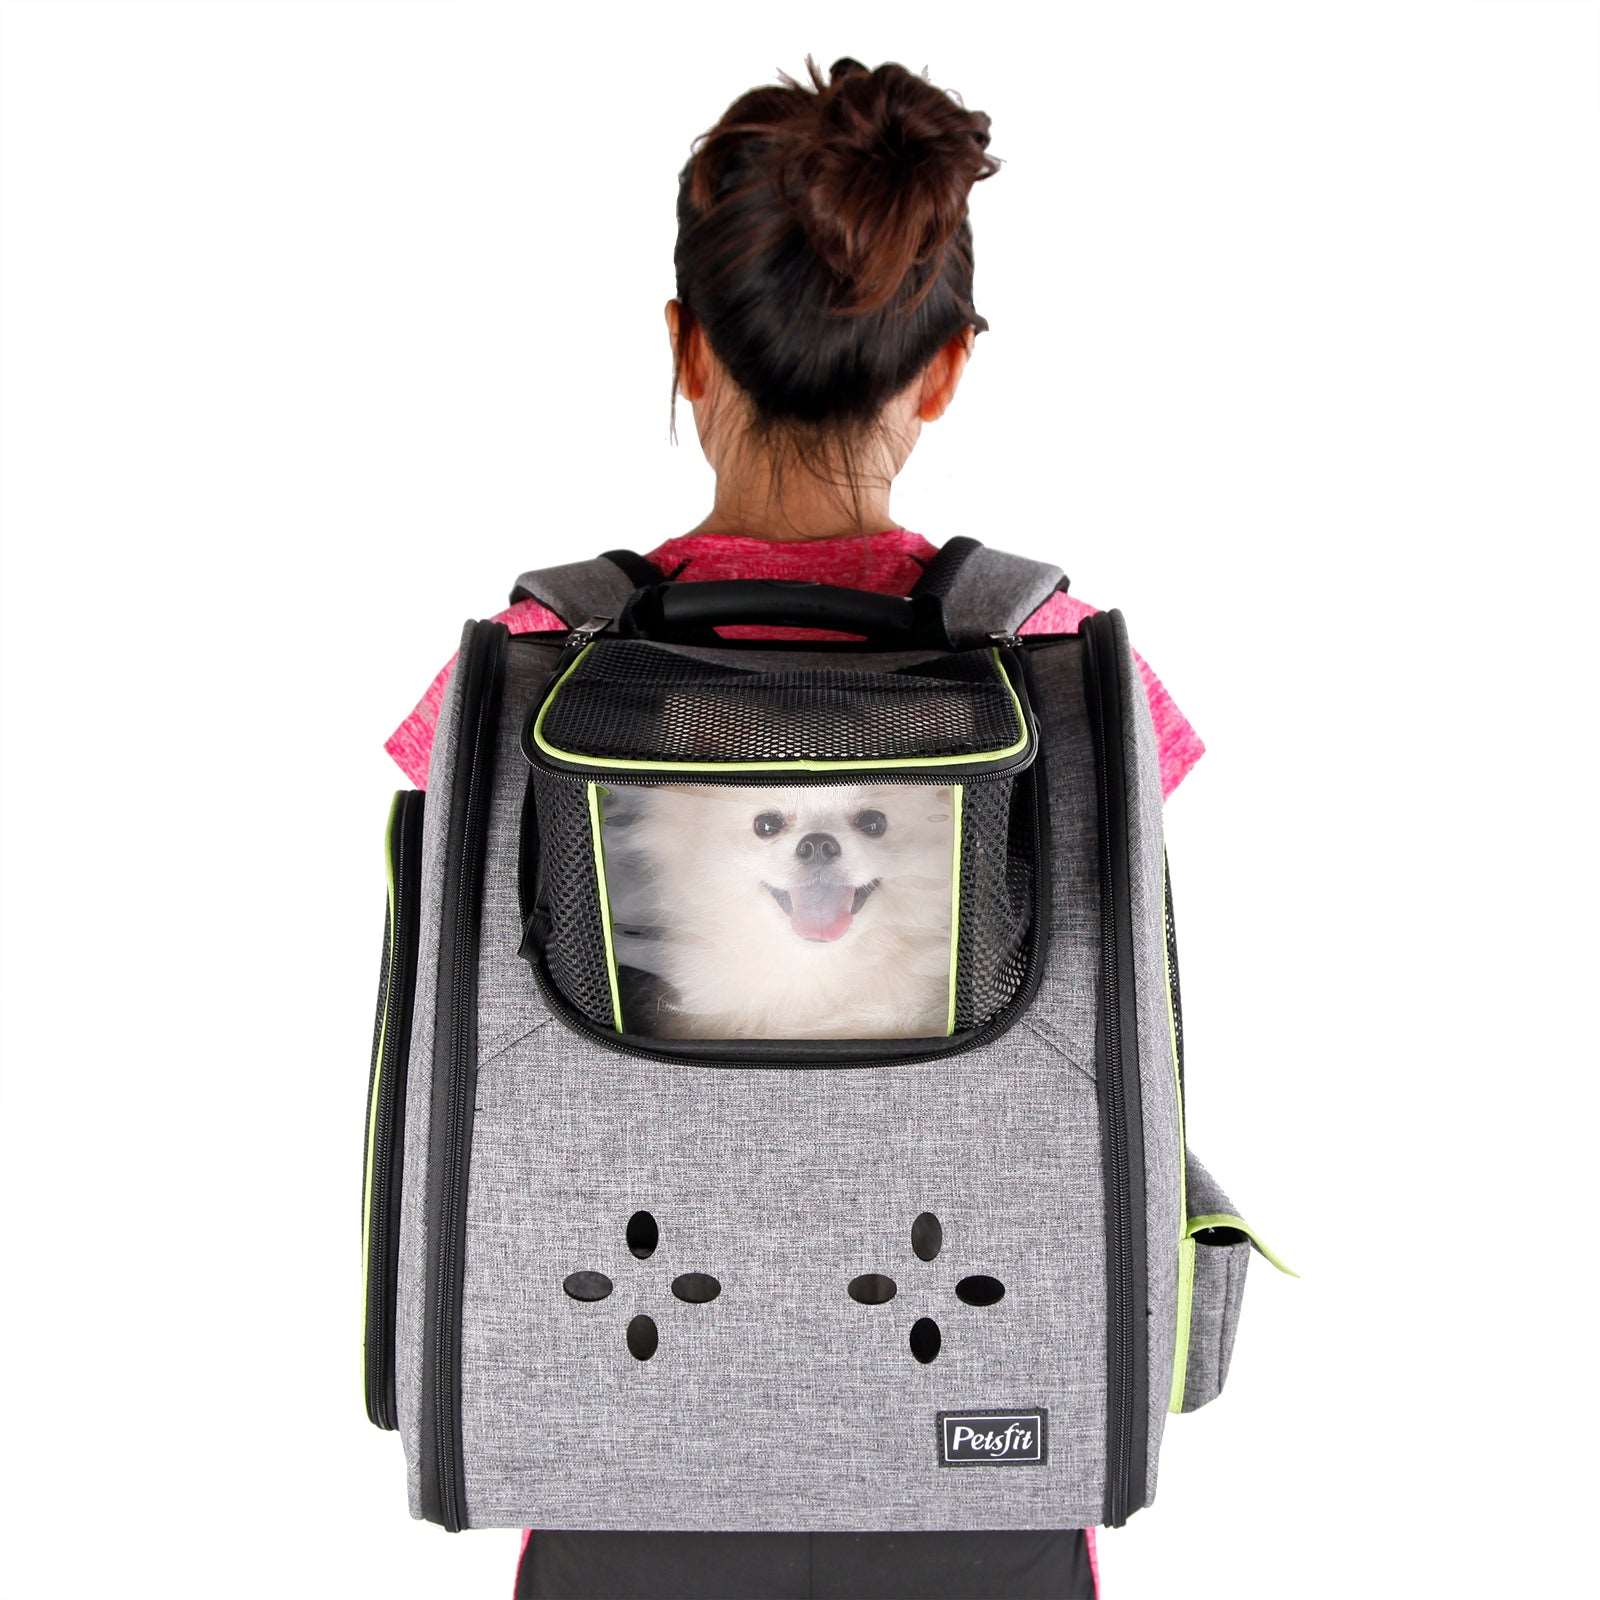 Petsfit-Cat-and-Dog-Backpack-Carrier-Soft-Side-with-Good-Ventilation-02